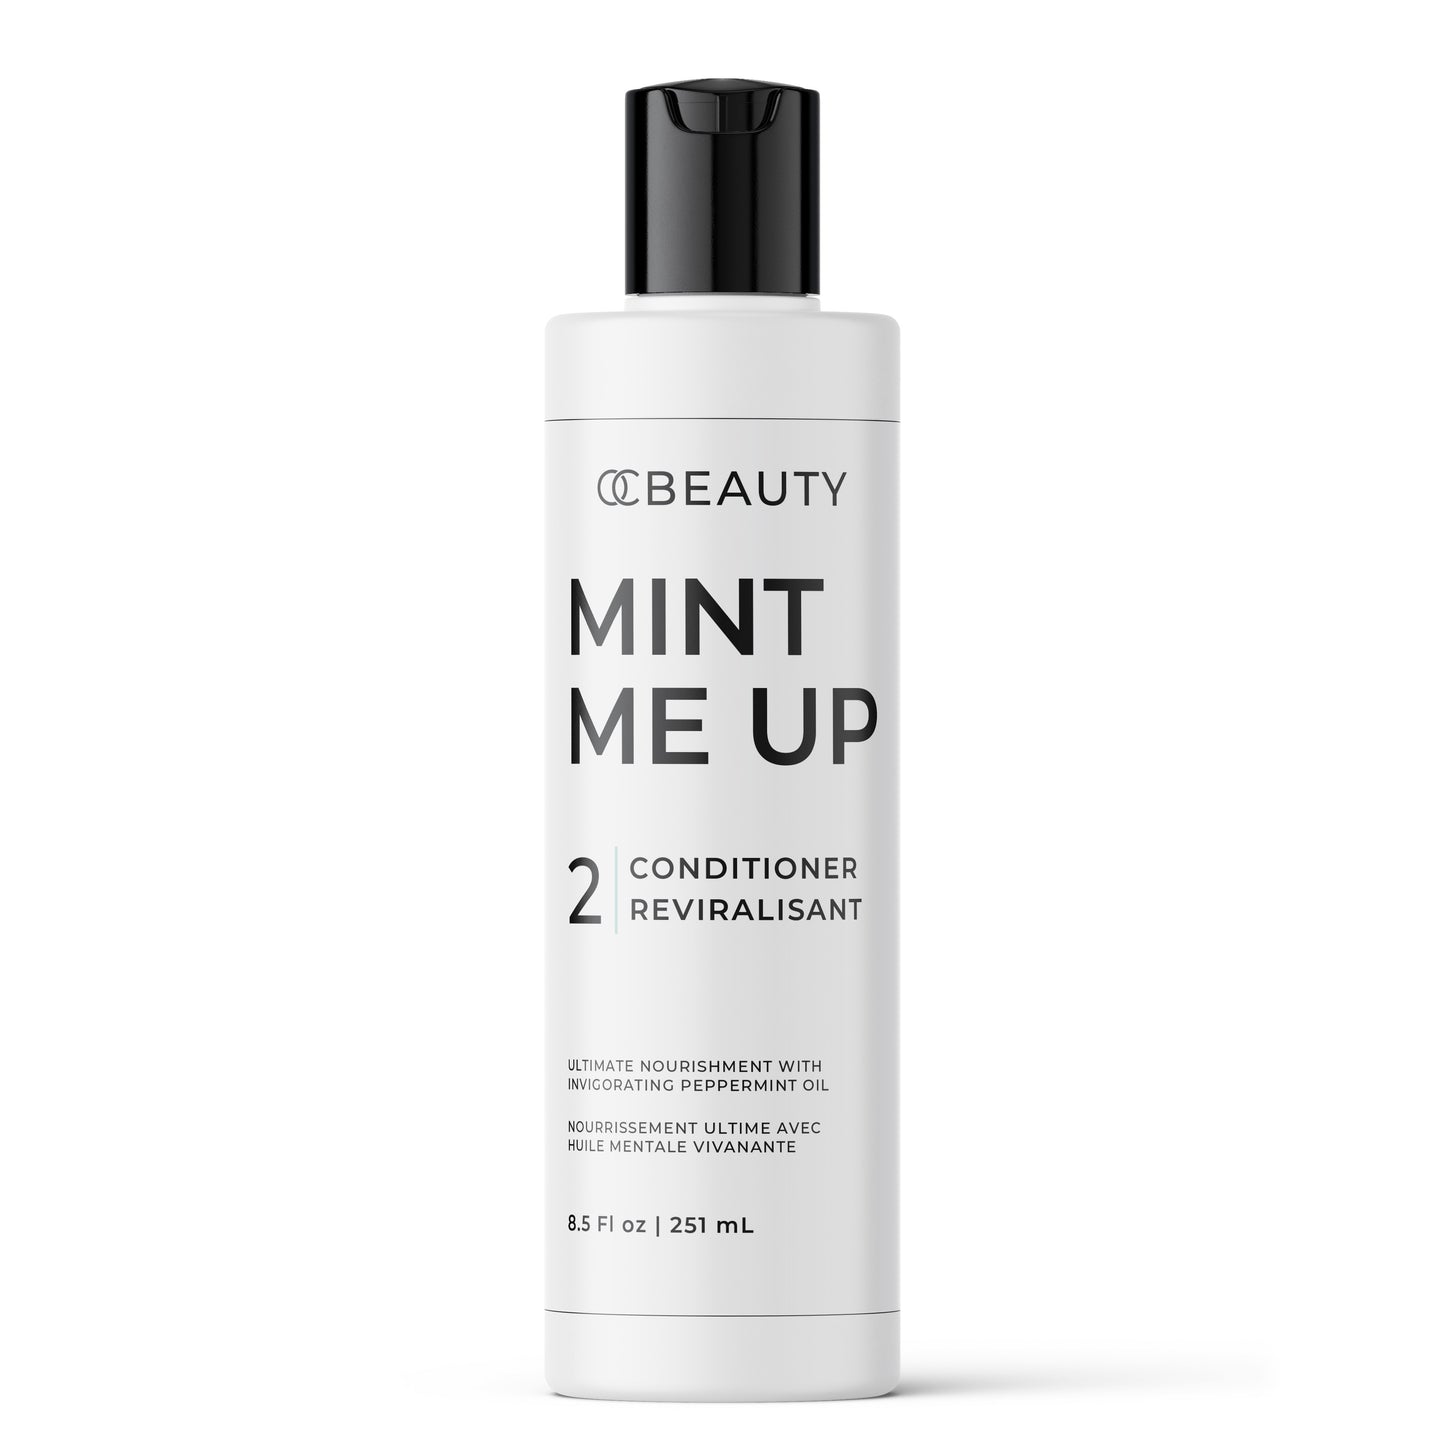 Mint Me Up Conditioner